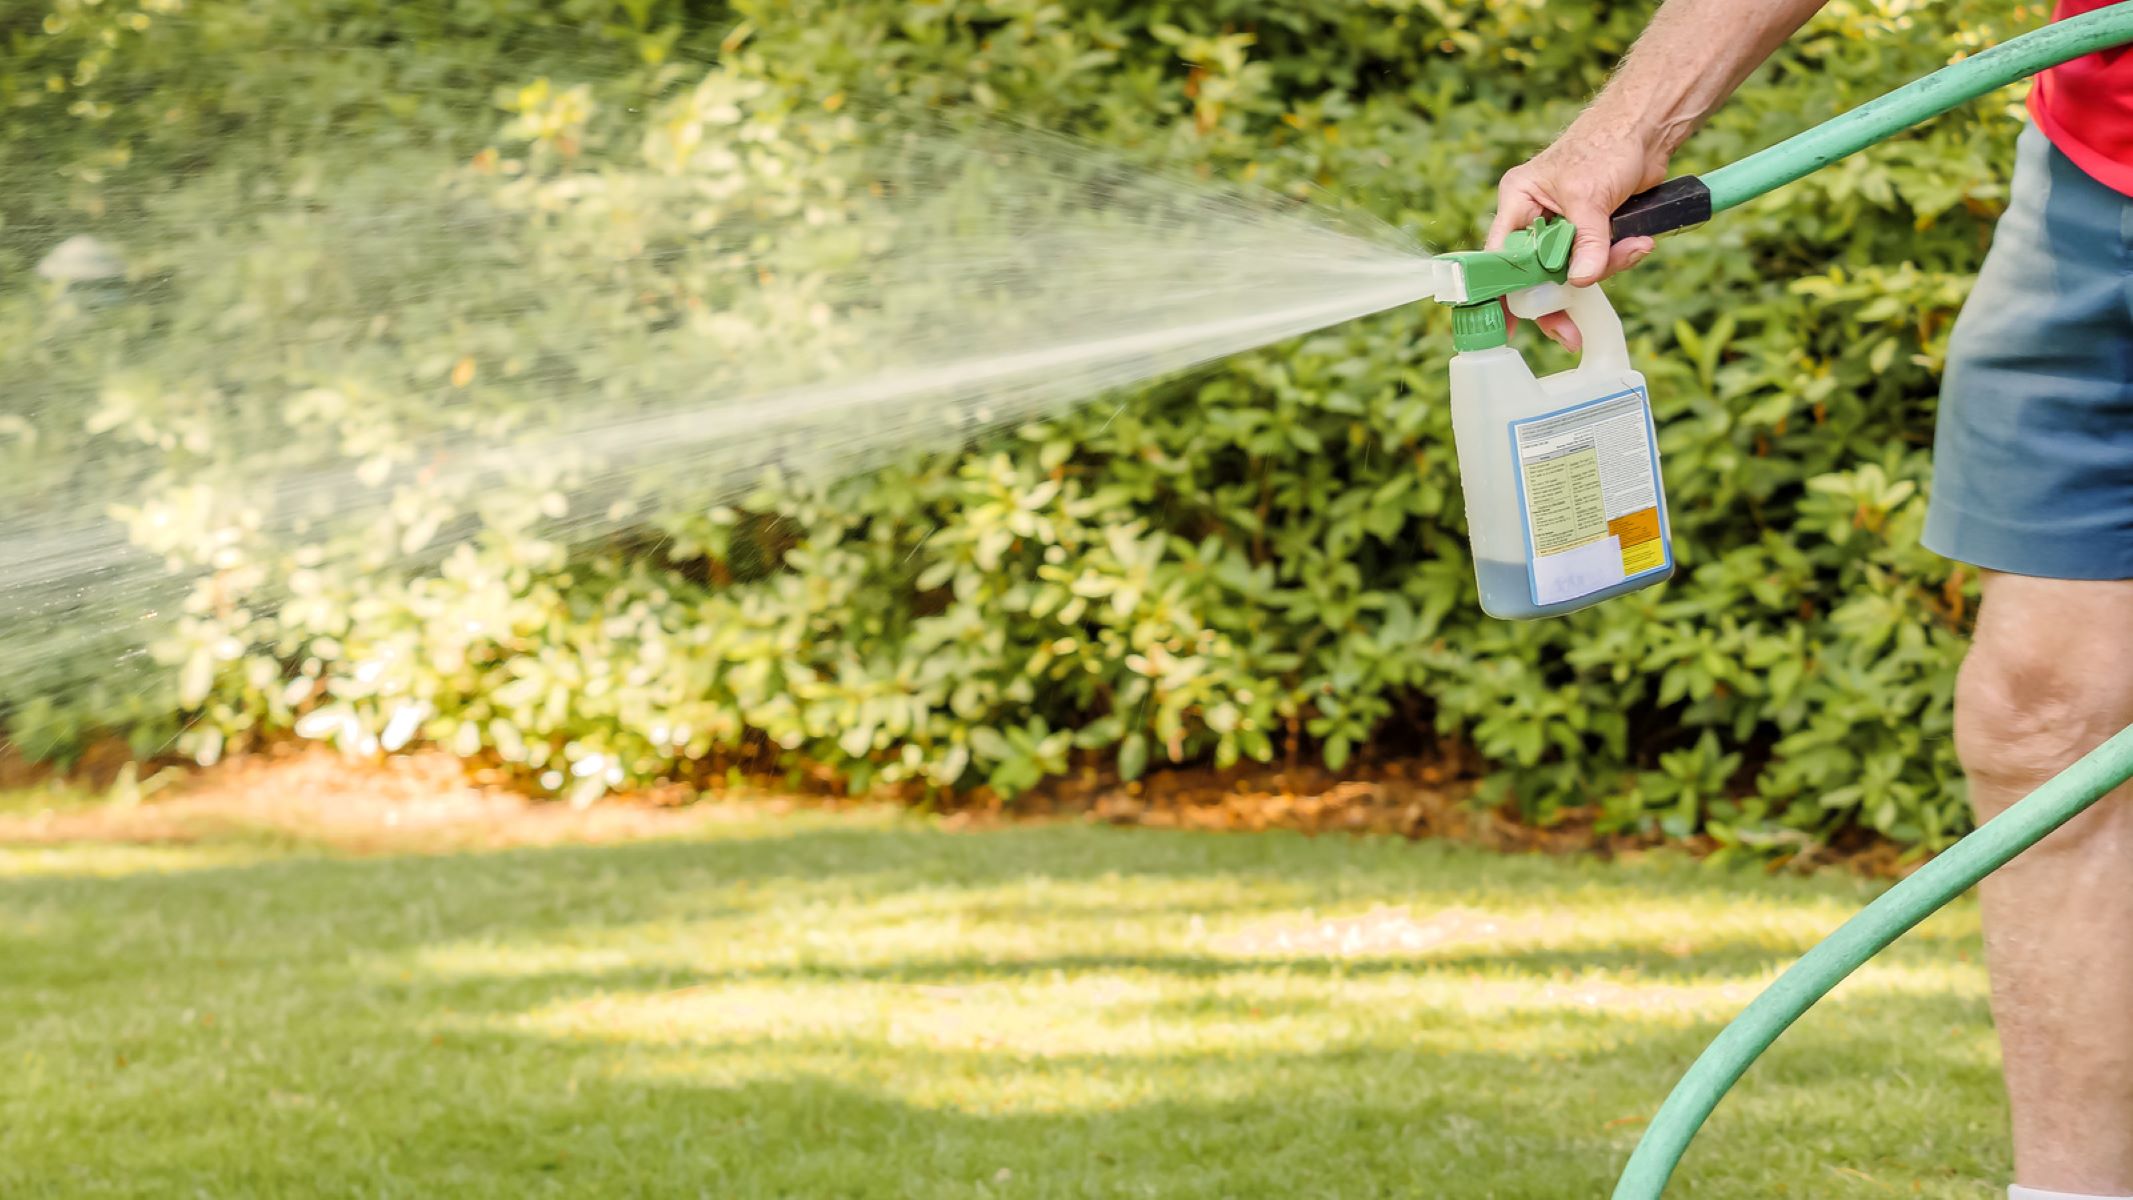 The Surprising Step You're Missing Before Spraying Weed Killer!